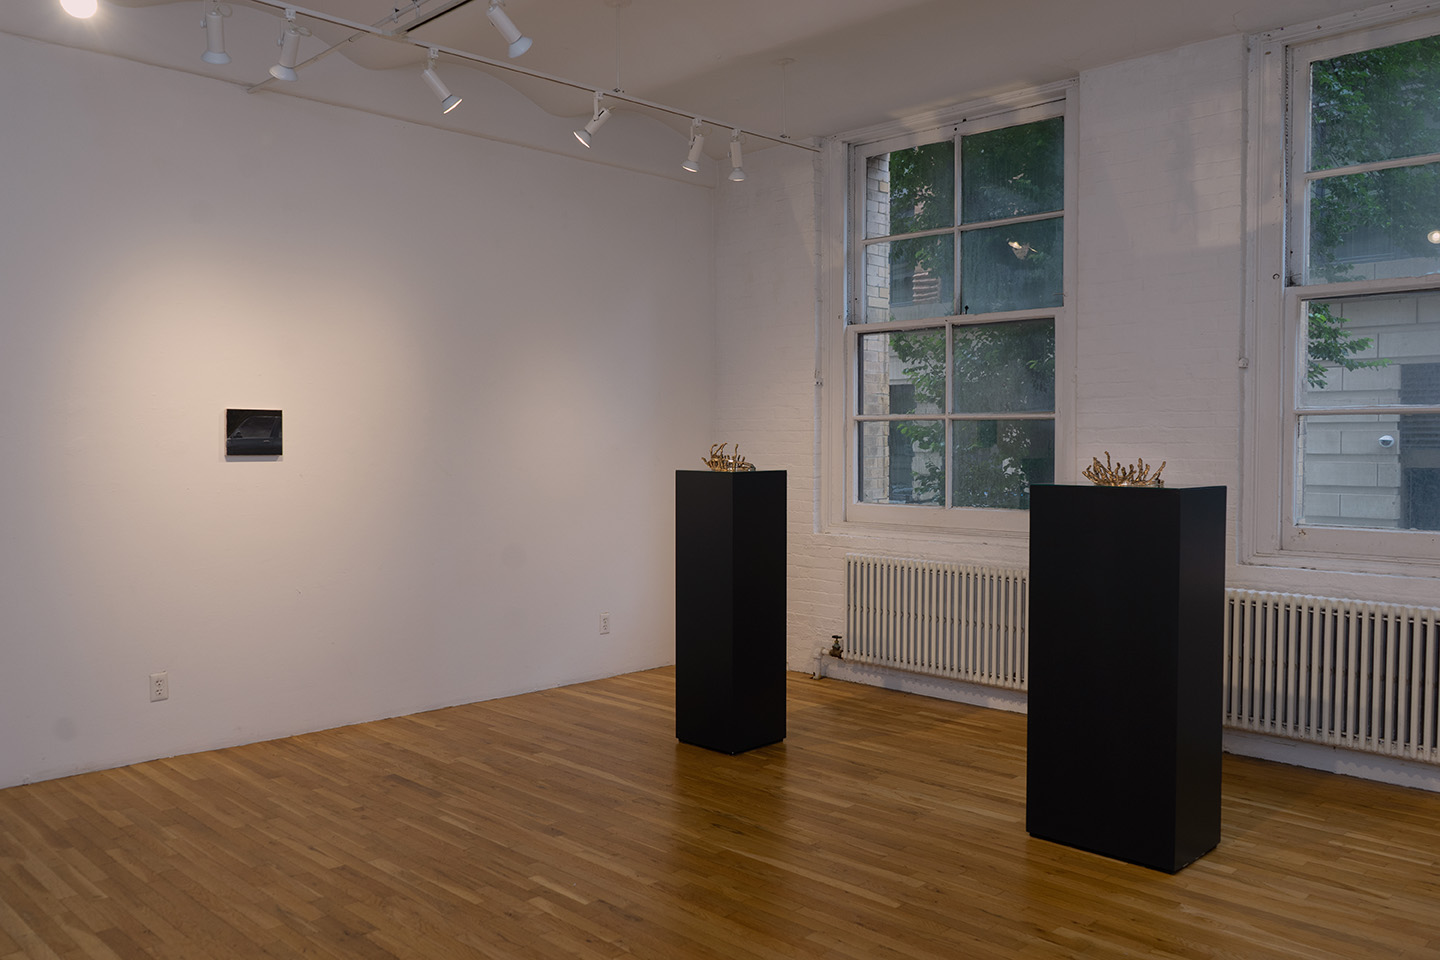 [A view of three artworks in a gallery with two windows. On the left is a small dark painting alone on a white wall and in the gallery’s center, in front of two windows, are two golden-color sculptures, each sitting on a tall black plinth.]